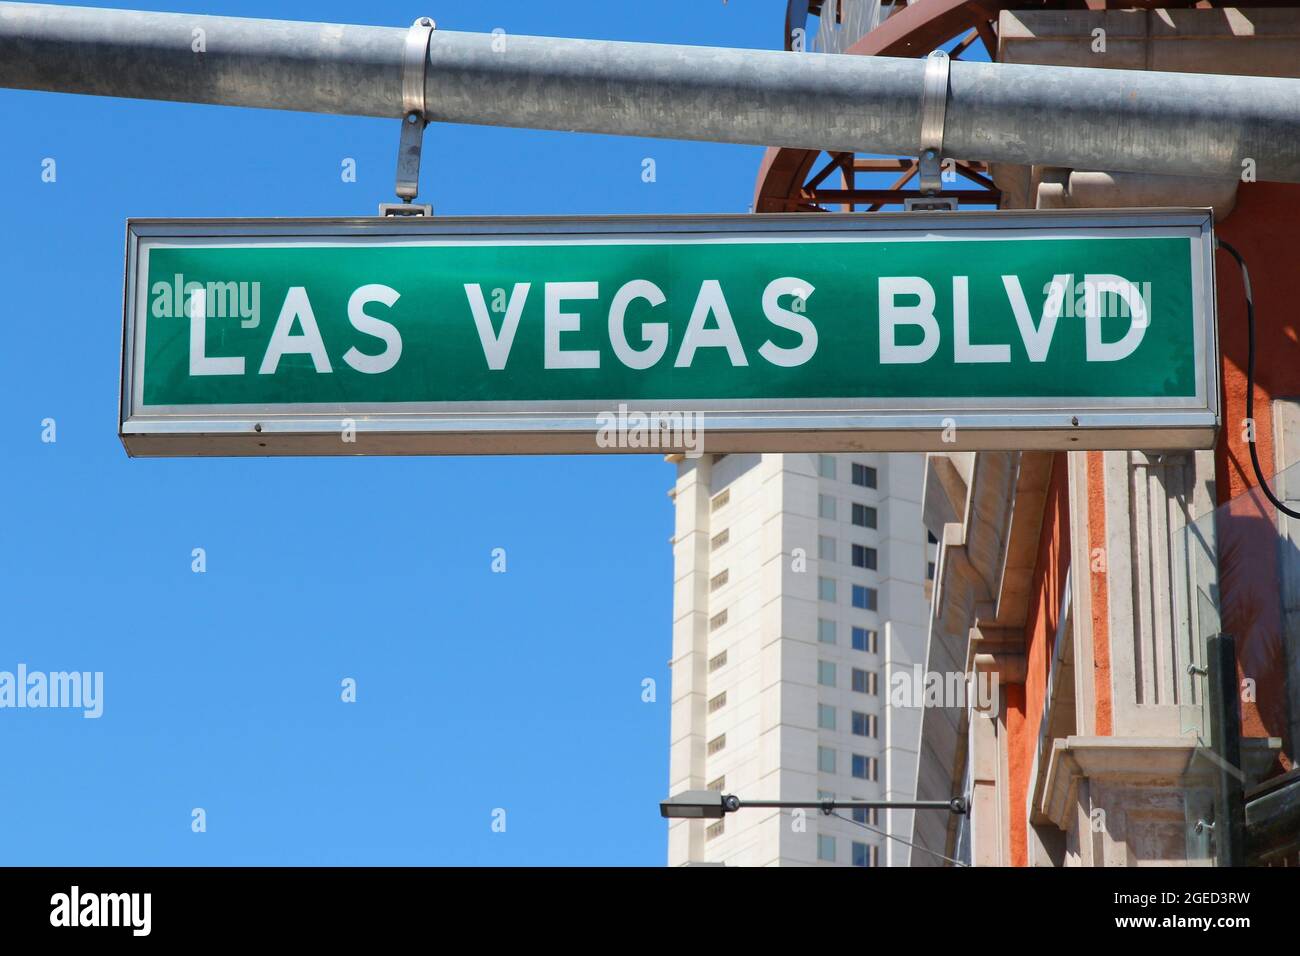 Las Vegas Strip Road Sign On The Main Street Boulevard Stock Photo, Picture  and Royalty Free Image. Image 42737638.